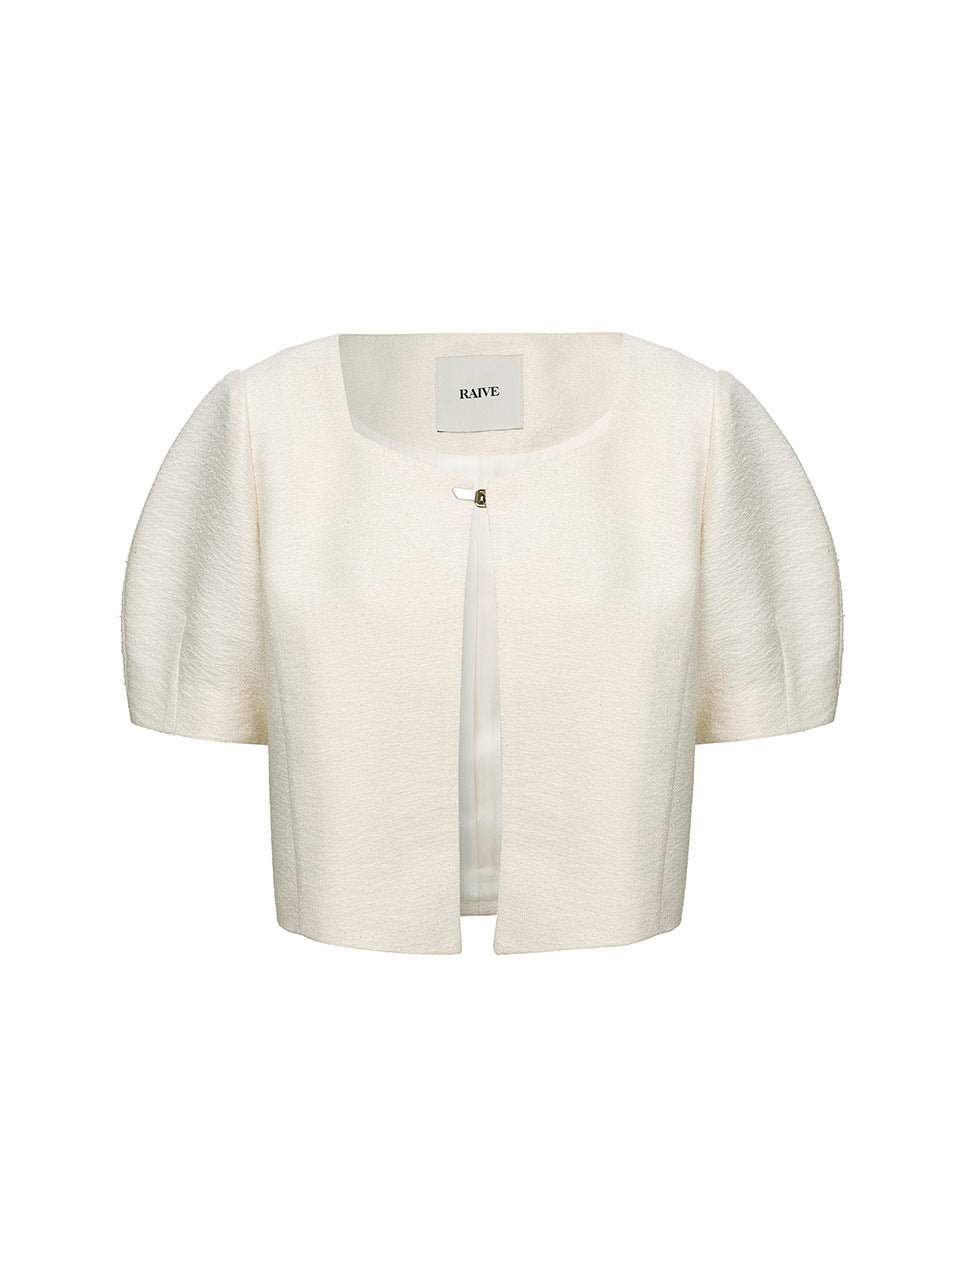 Square Neck Jacket in Ivory